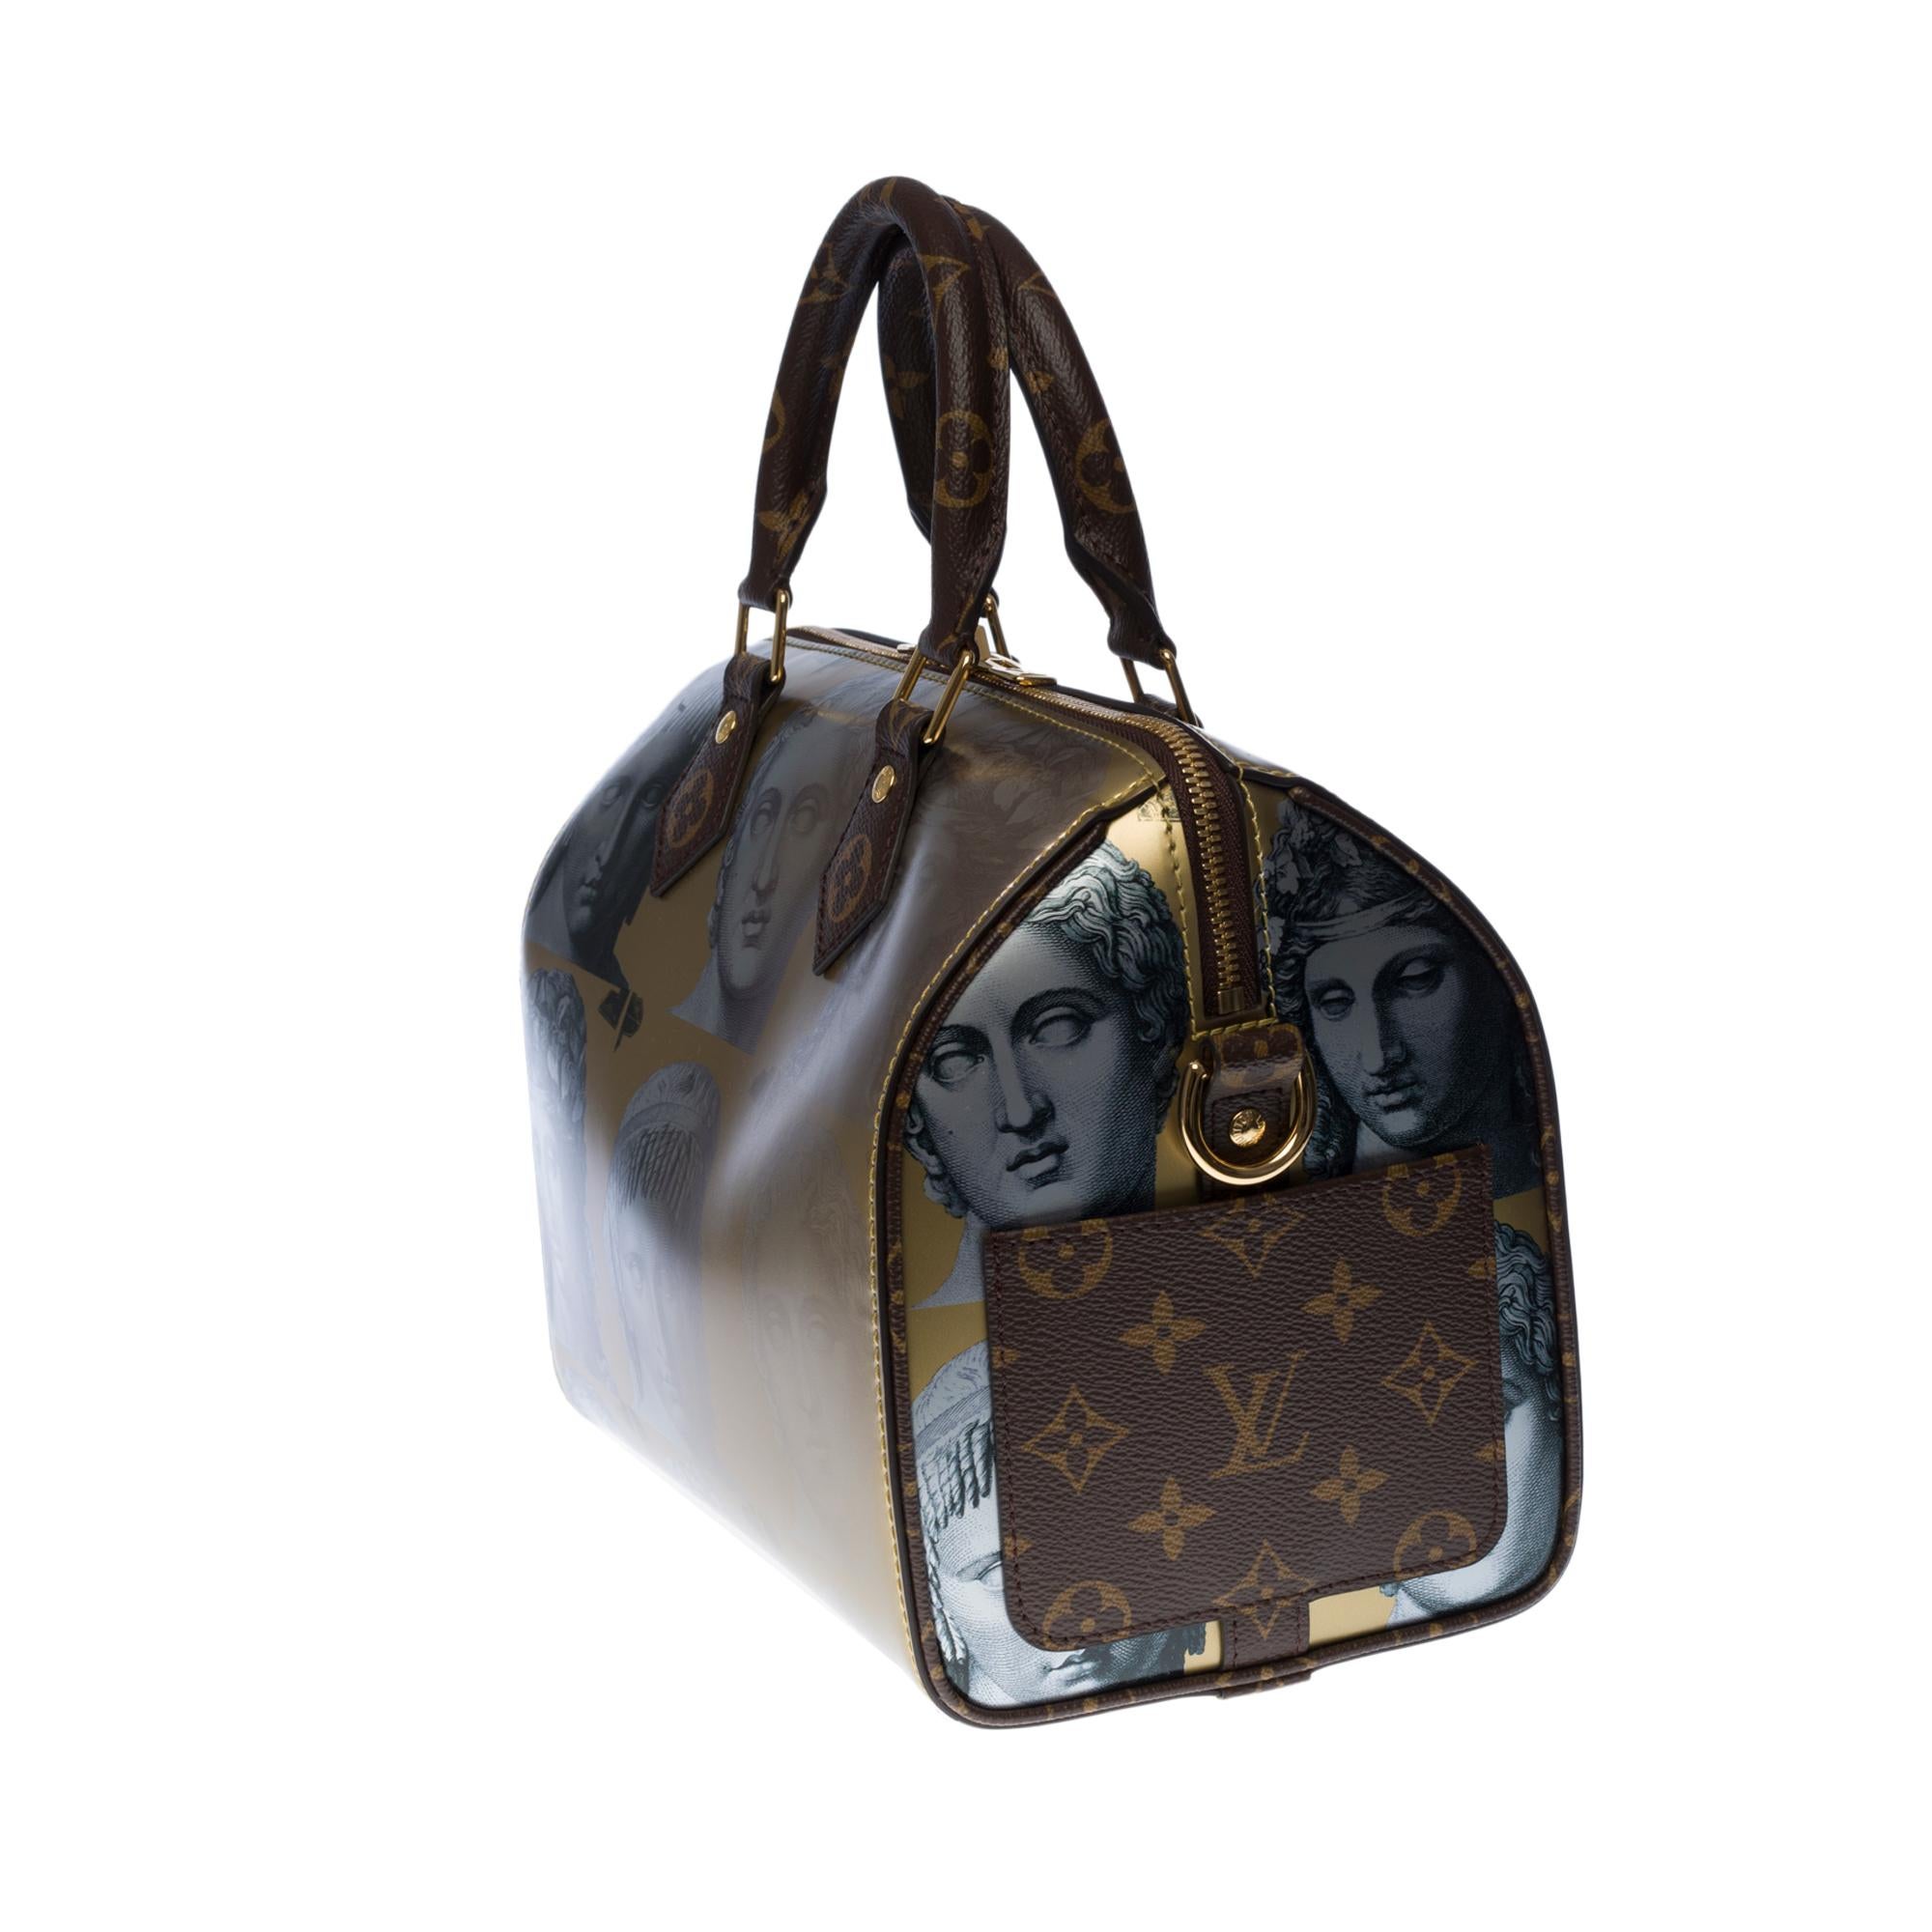 BRAND NEW-Limited edition Louis Vuitton Speedy 25 strap Fornasetti  fw21 1